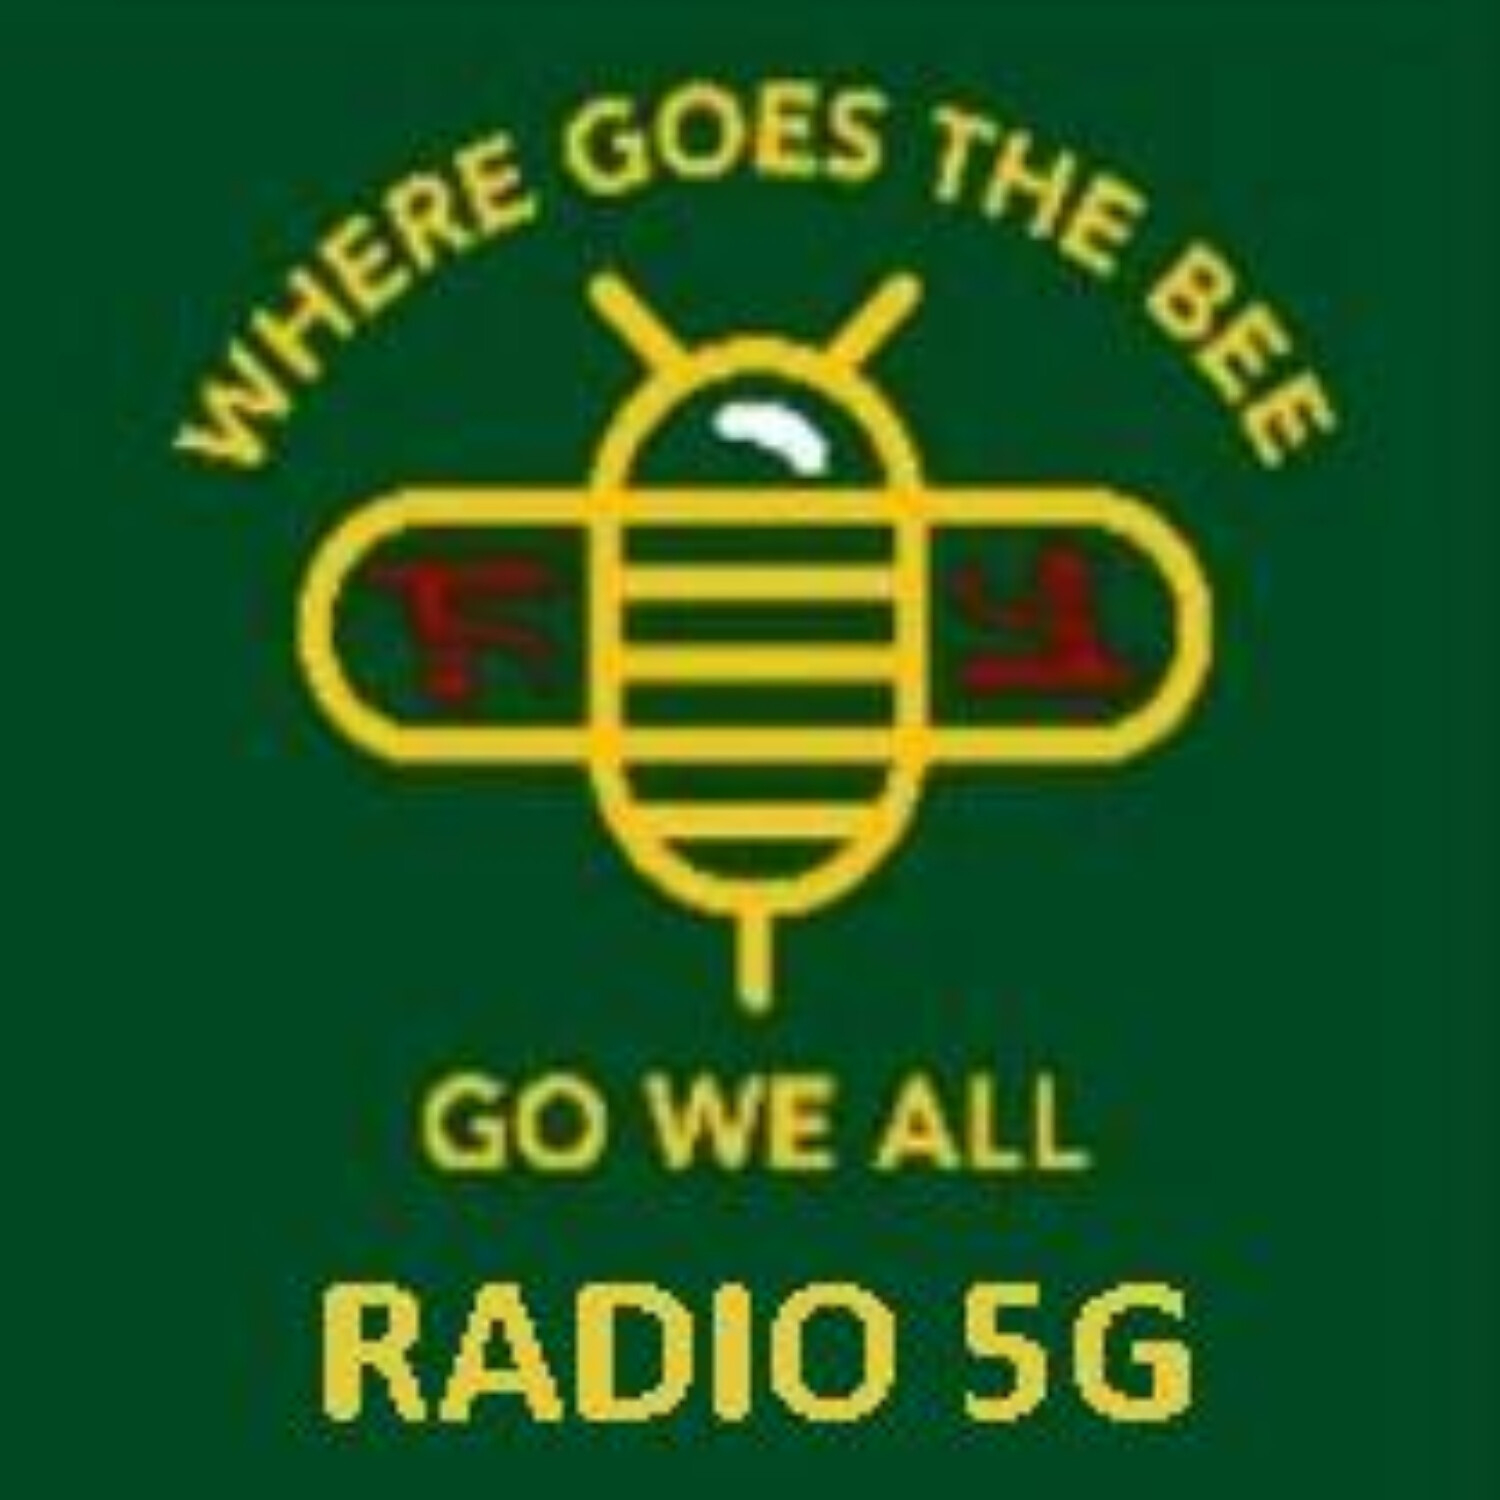 “RADIO 5G” 1/19/22 - Arthur Firstenberg - “How EMF and 5G Negatively Affects ALL Life on Earth”.